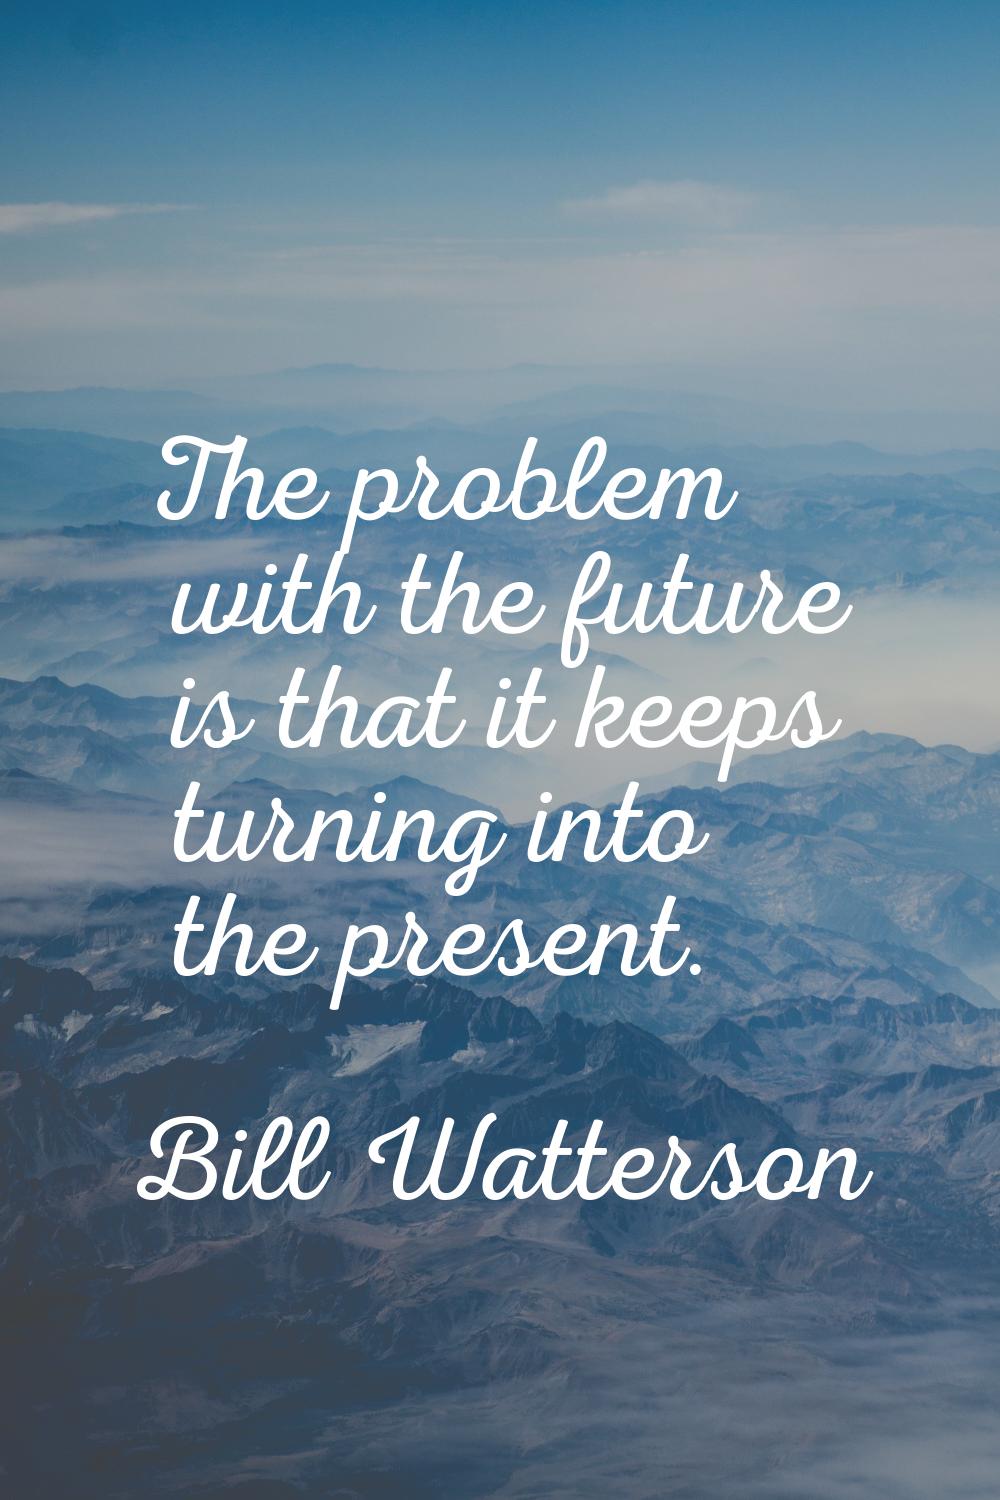 The problem with the future is that it keeps turning into the present.